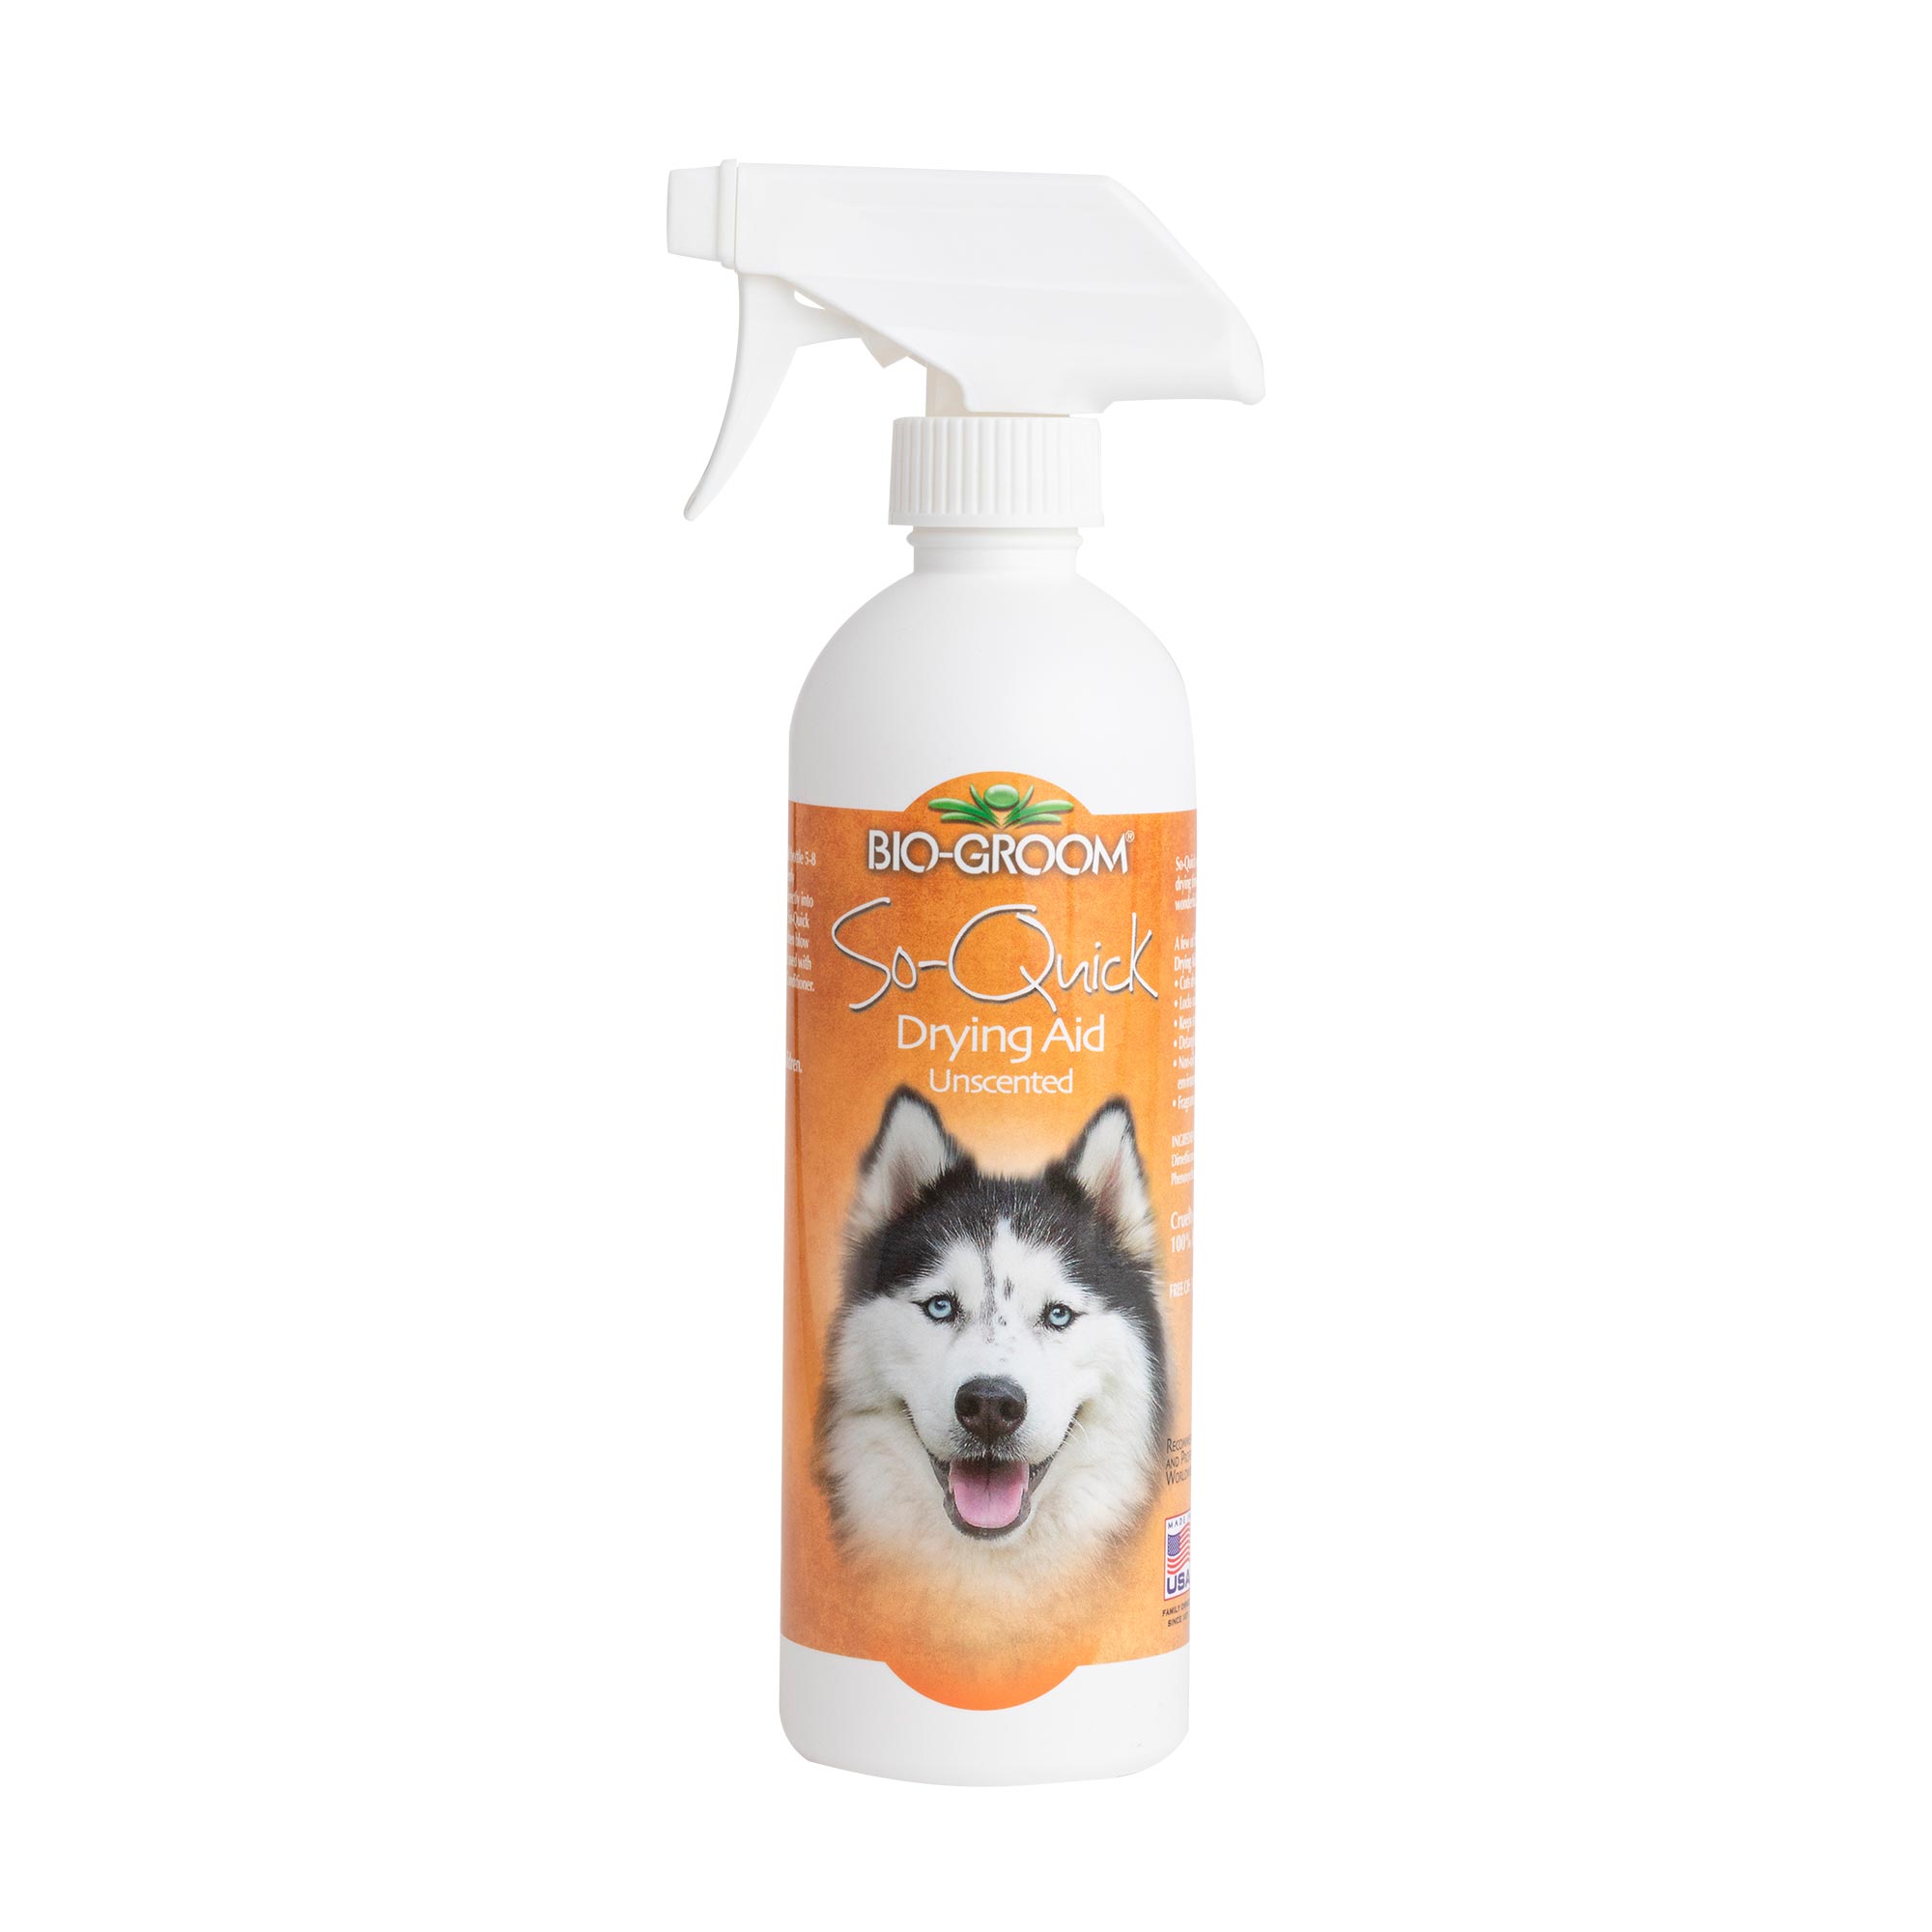 Bio-Groom So-Quick Drying Aid (unscented) 16oz